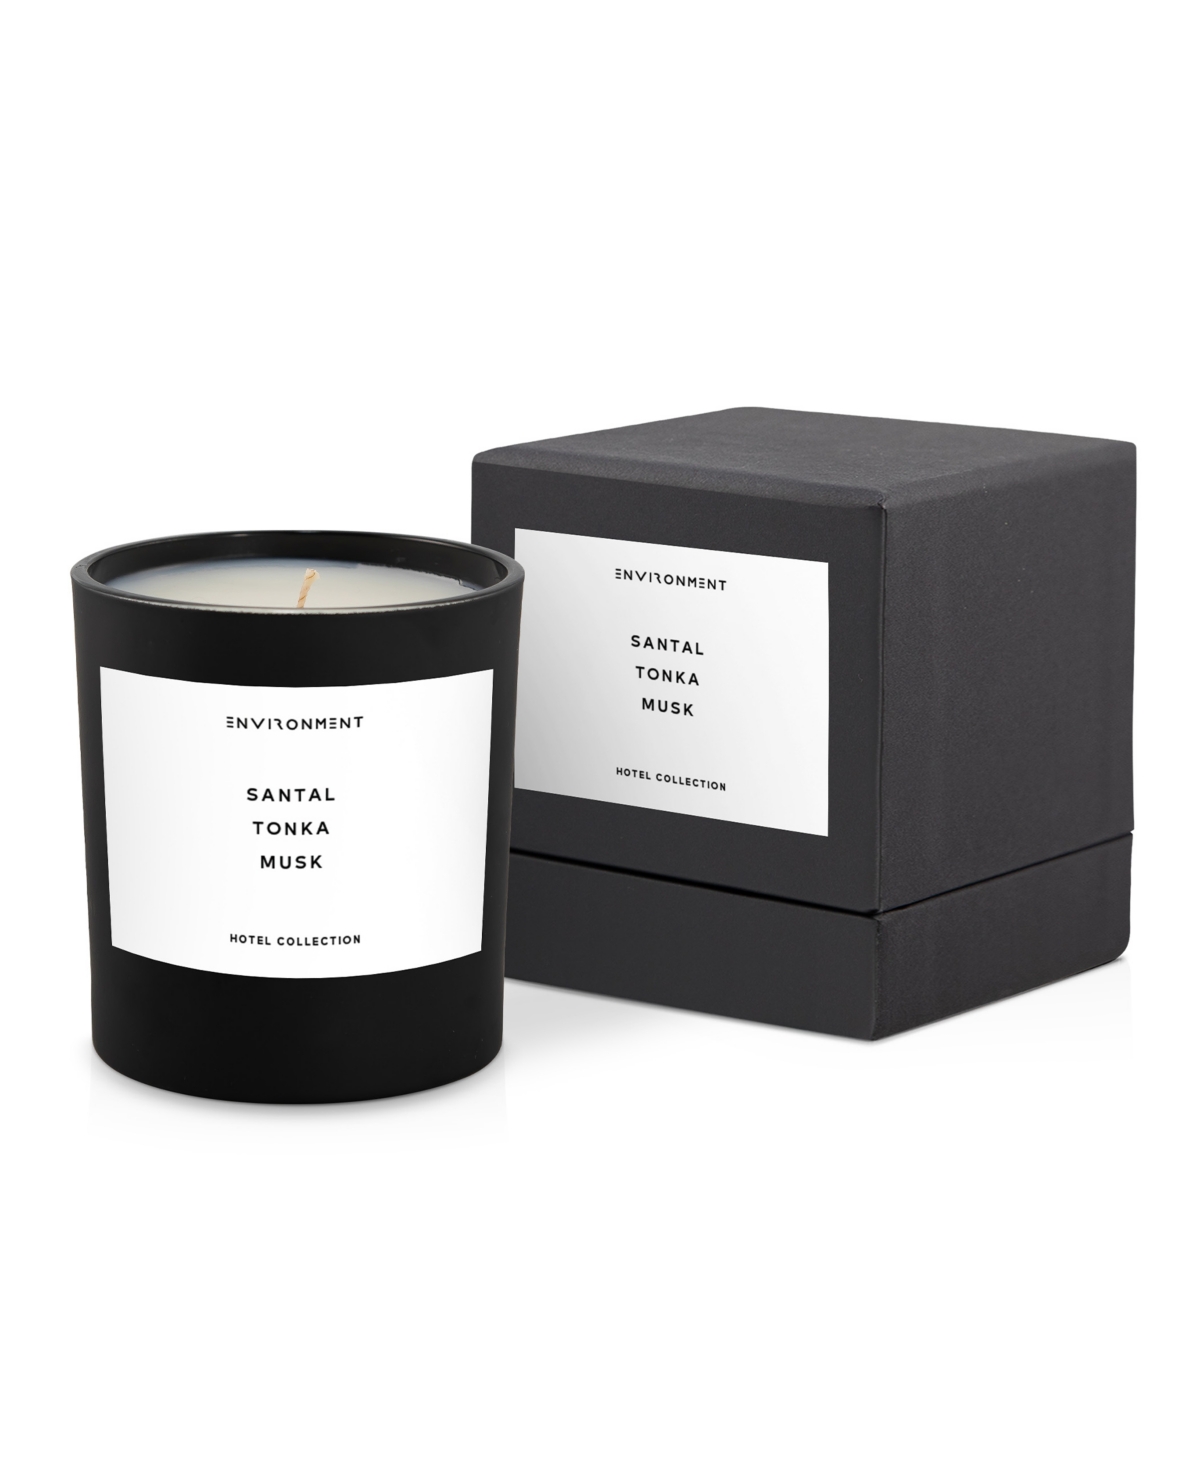 Santal, Tonka & Musk Candle (Inspired by 5-Star Hotels), 8 oz.